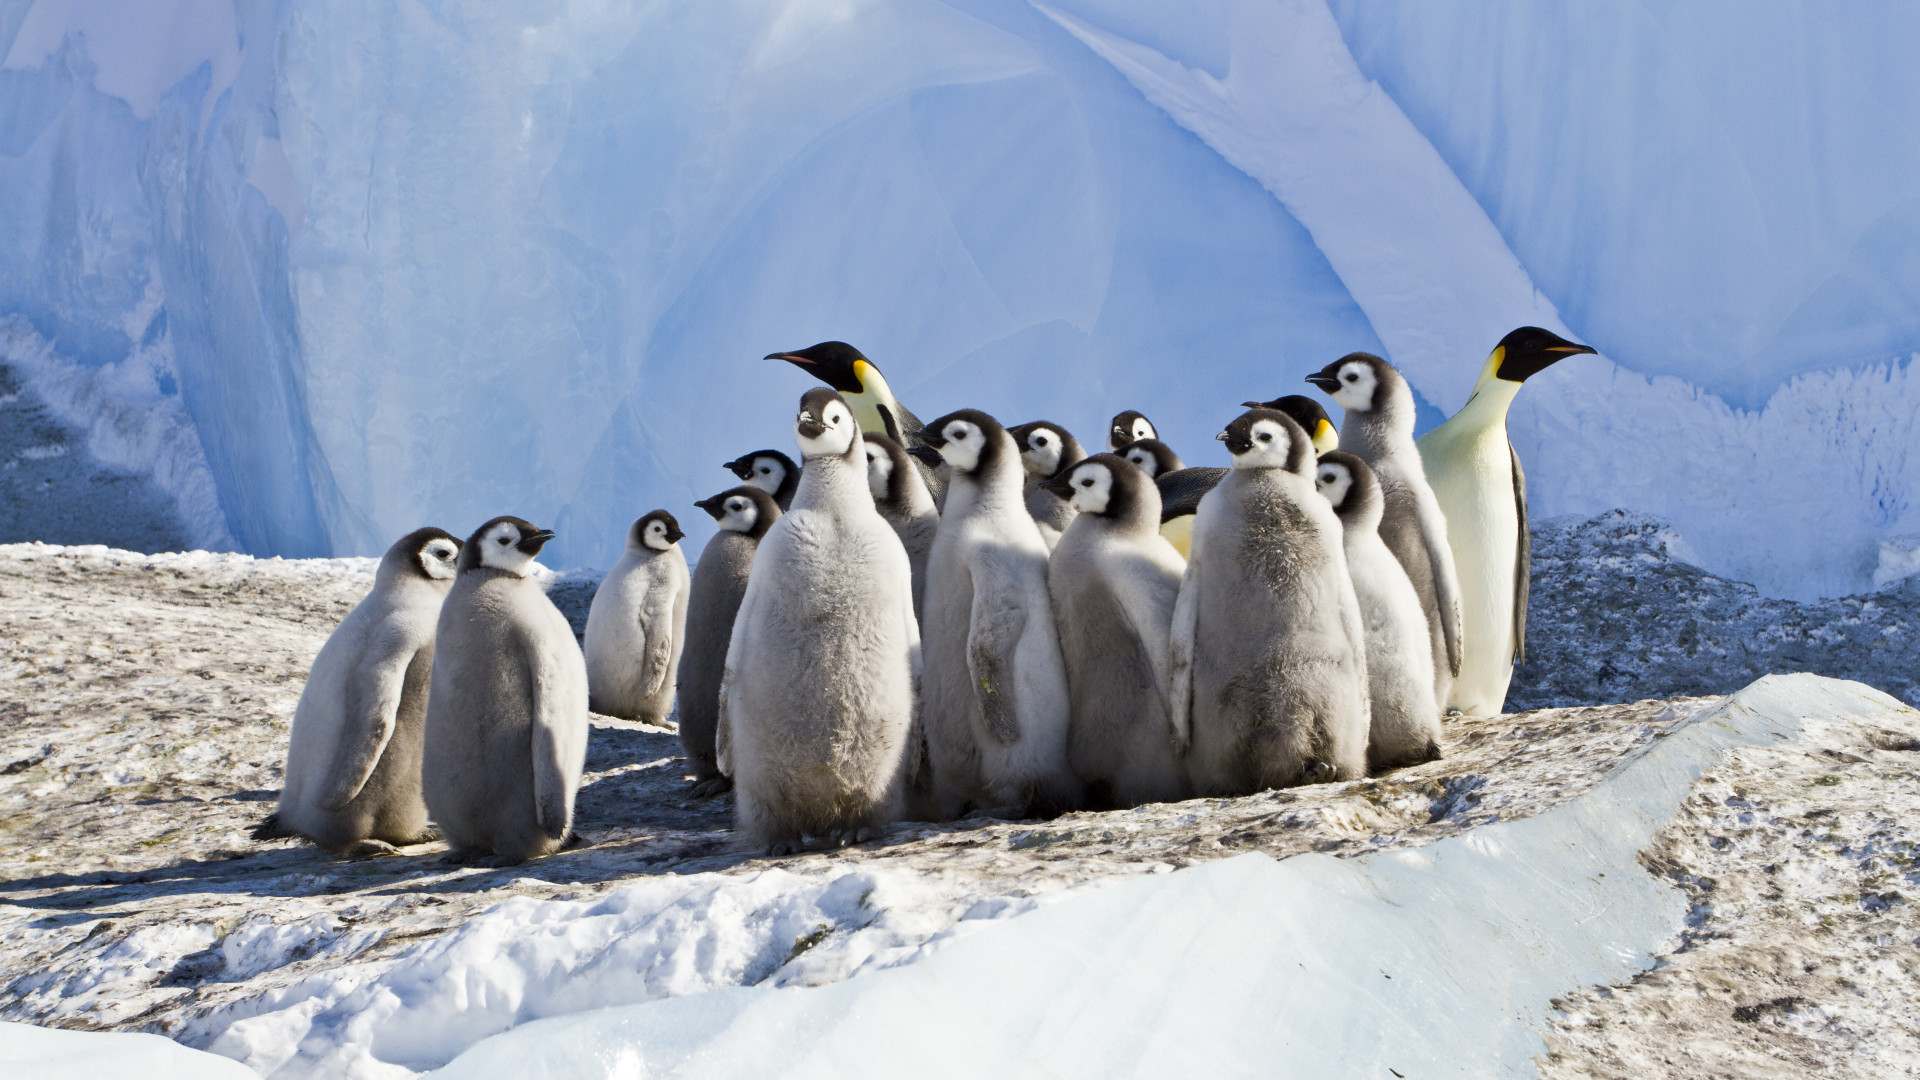 Young and adult emperor penguins in an icy landscape.